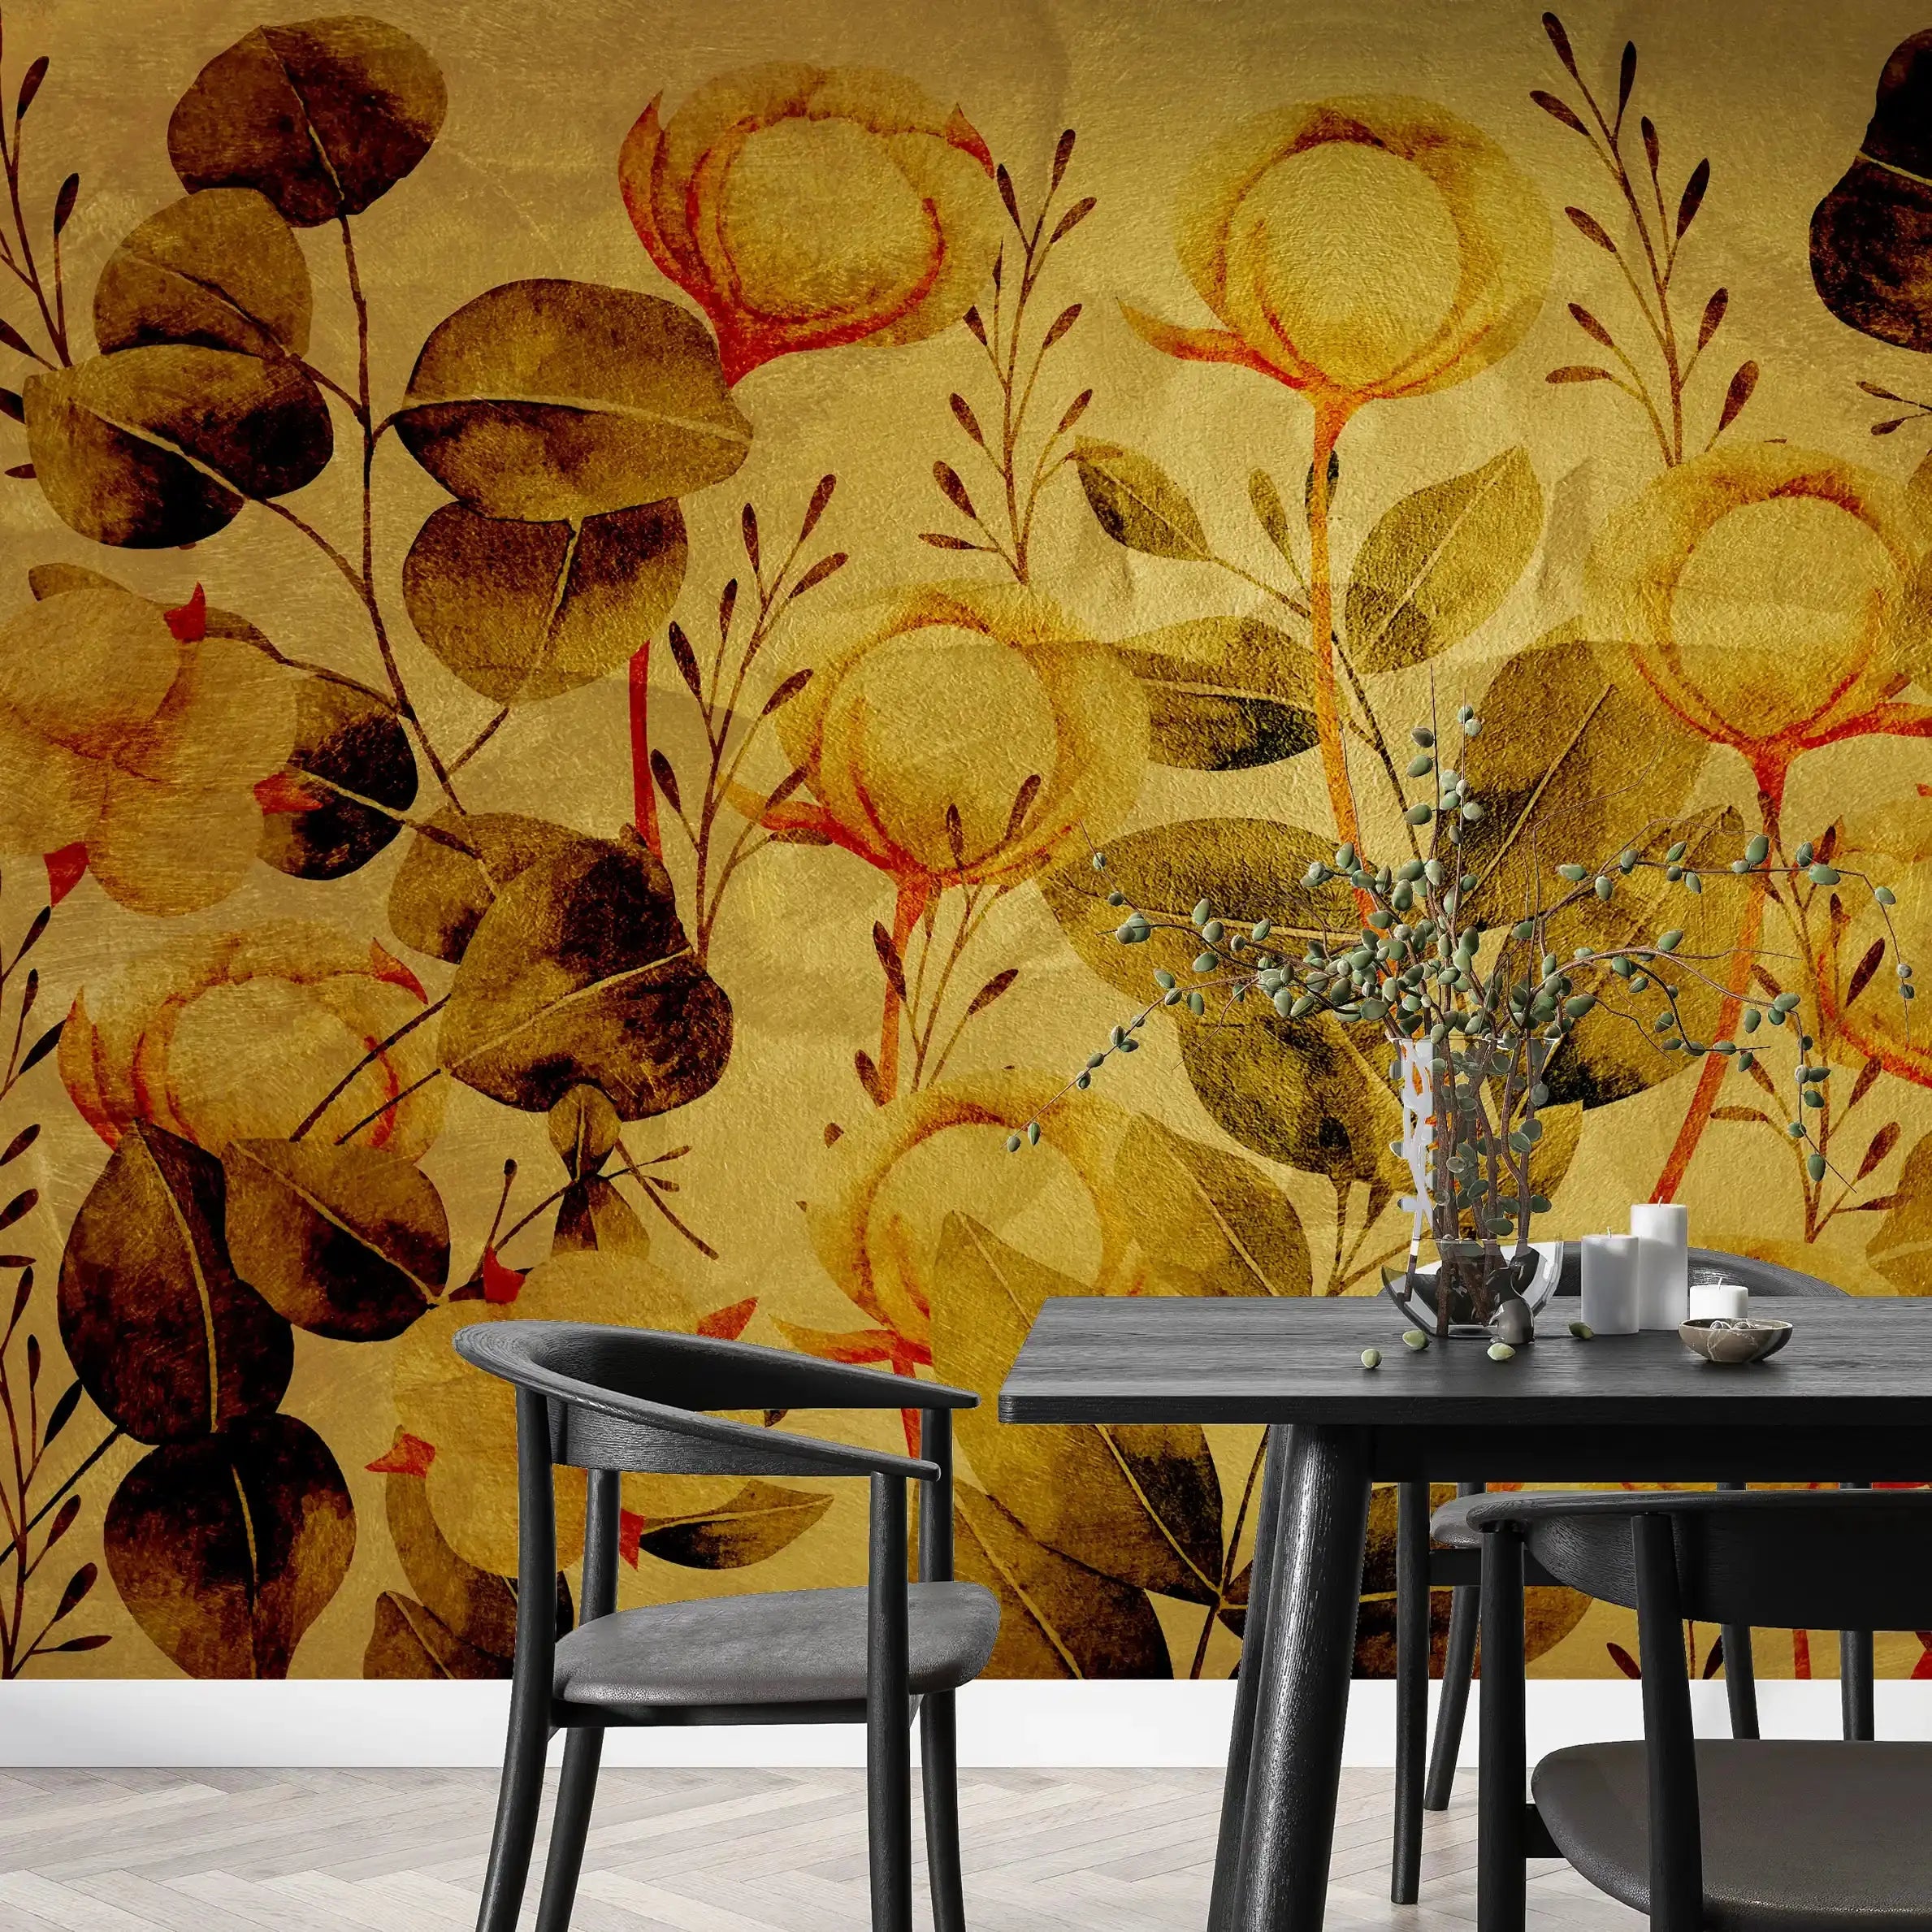 3035-D / Floral Wall Decor: Peelable, Stickable Wallpaper with Tulips Design on Gold Background, Ideal for Room Decor - Artevella